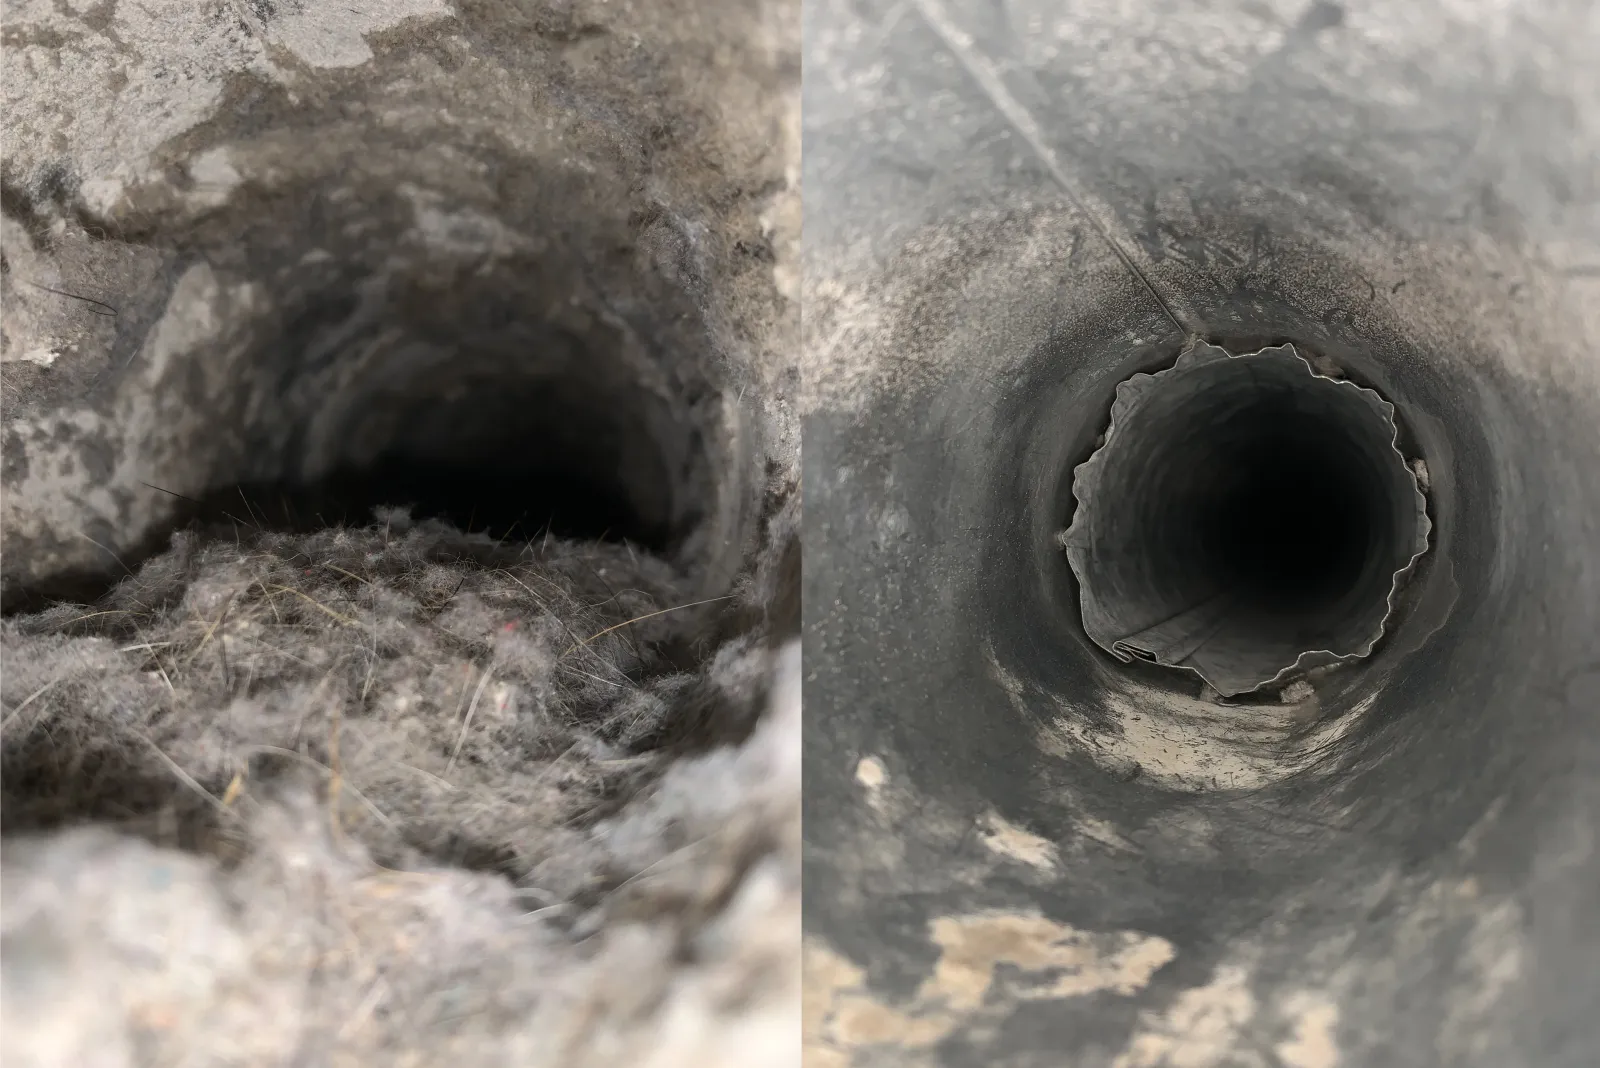 Before and After visual inside a residential dryer vent hose that was cleaned by Zerorez